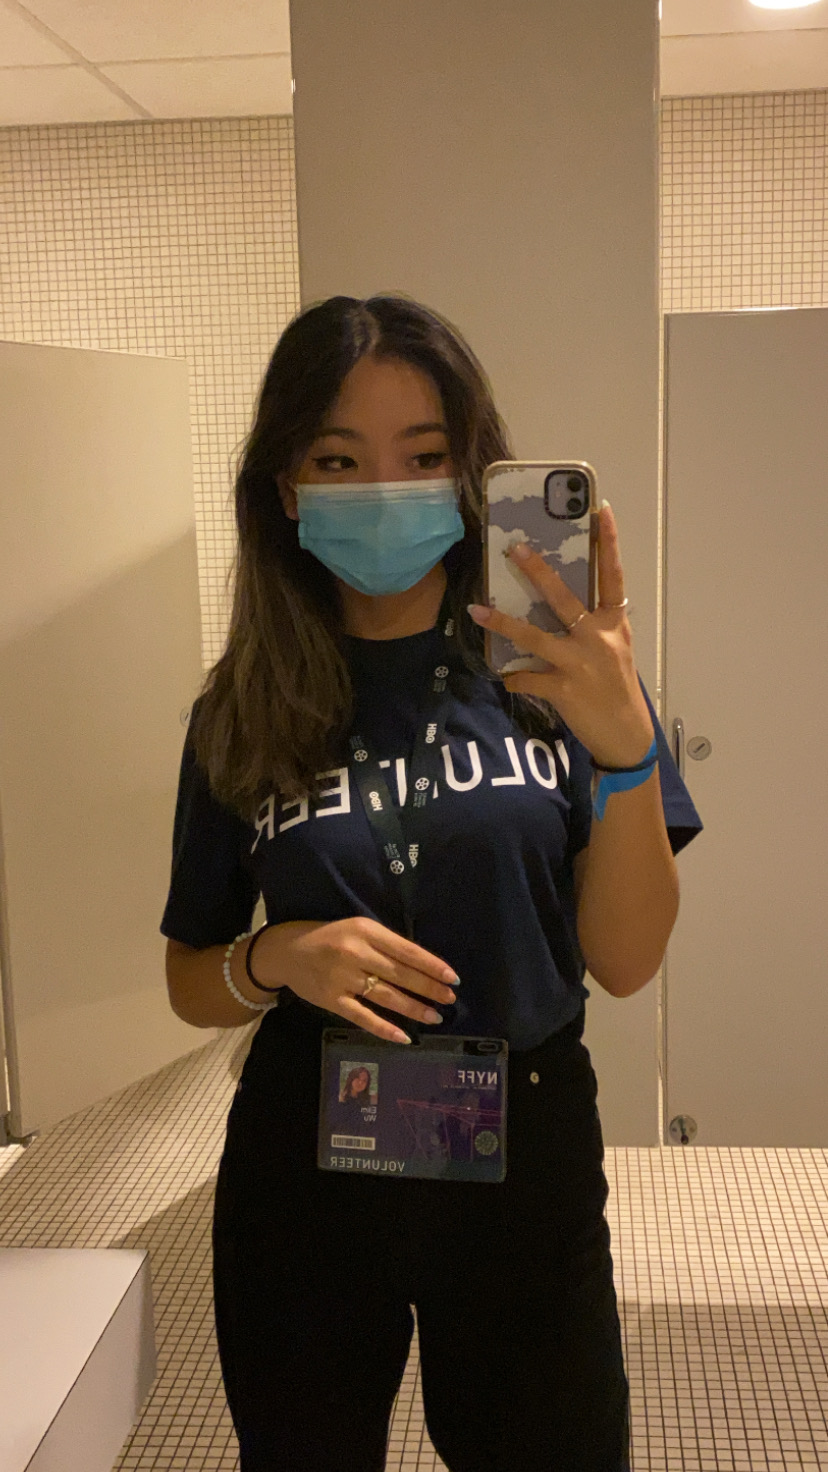 Elim Wu, the author, taking a mirror selfie and wearing a mask.